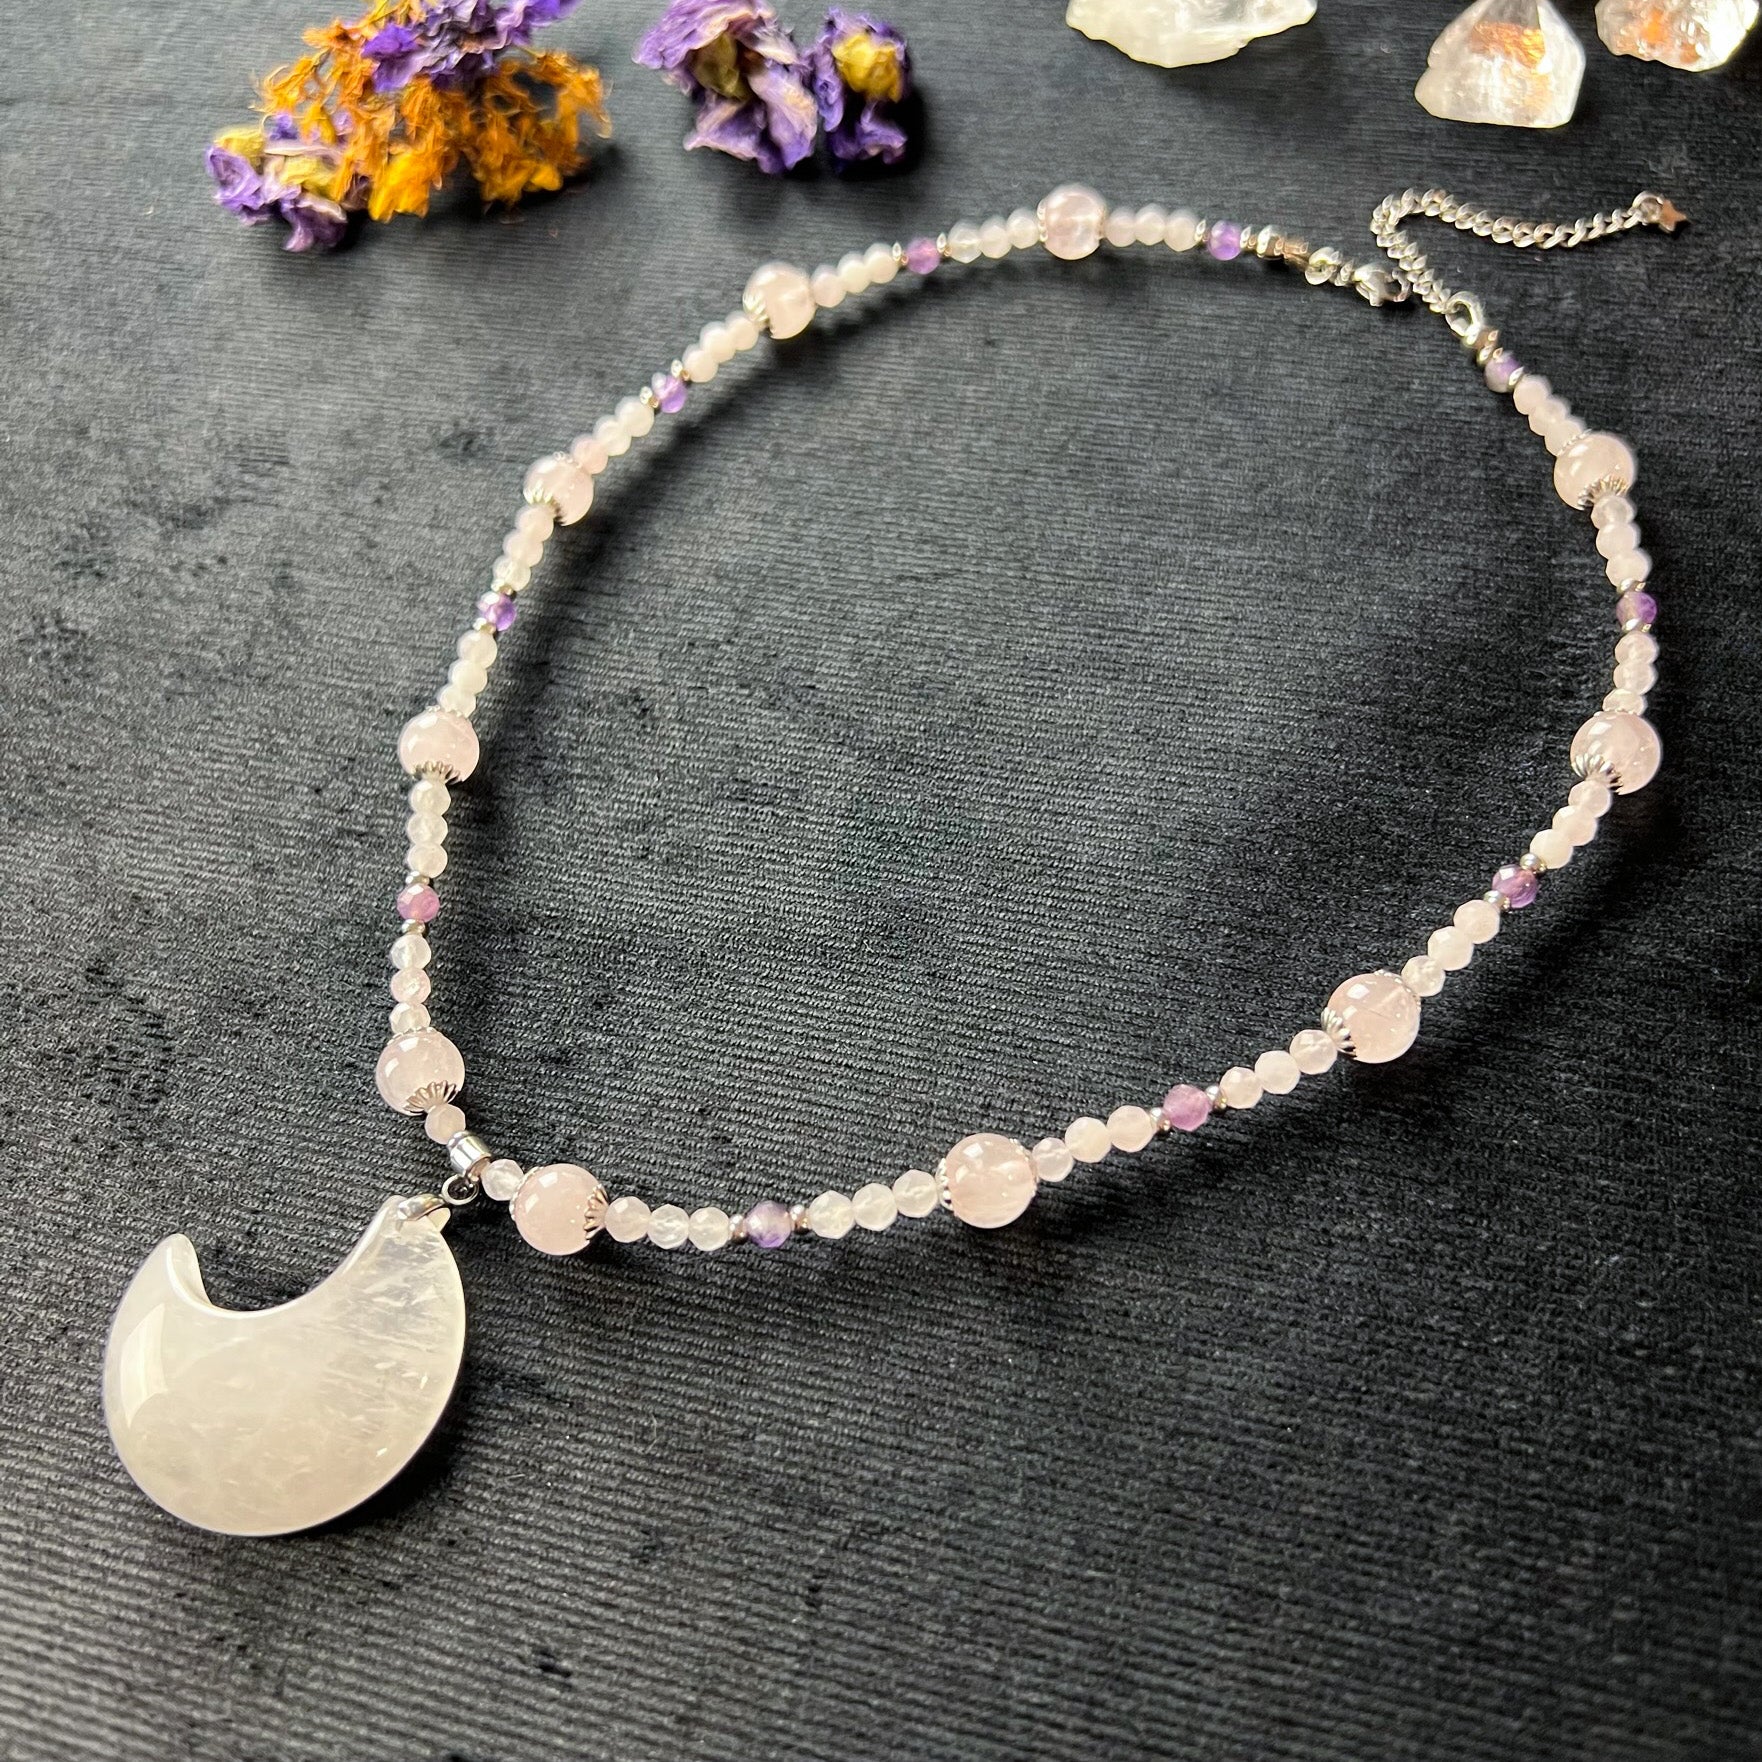 Gemstone necklace quartz moon crescent amethyst and rose quartz beads stainless steel Rêveries Collection fantasy fairy necklace